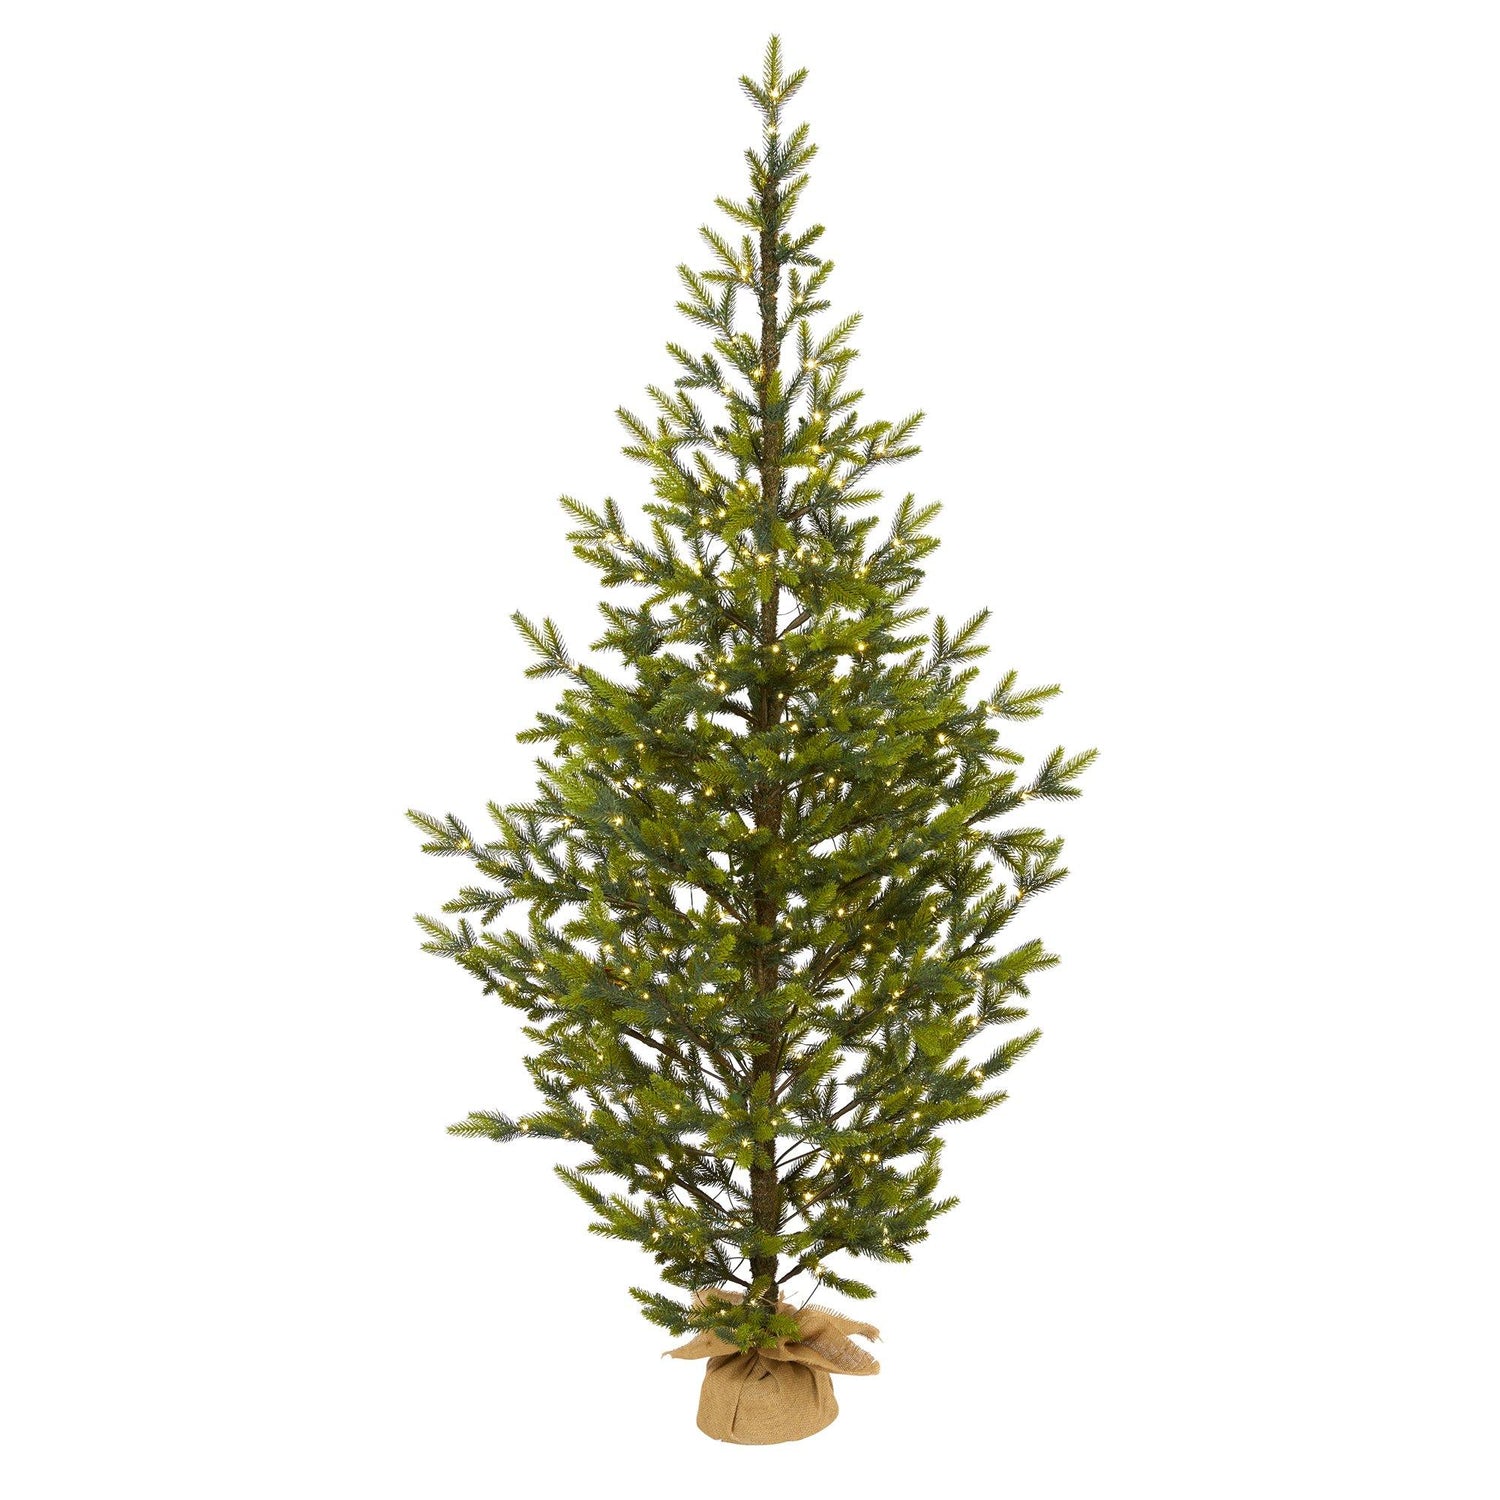 6’ Fraser Fir “Natural Look” Artificial Christmas Tree with 250 Clear LED Lights, a Burlap Base and 1243 Bendable Branches